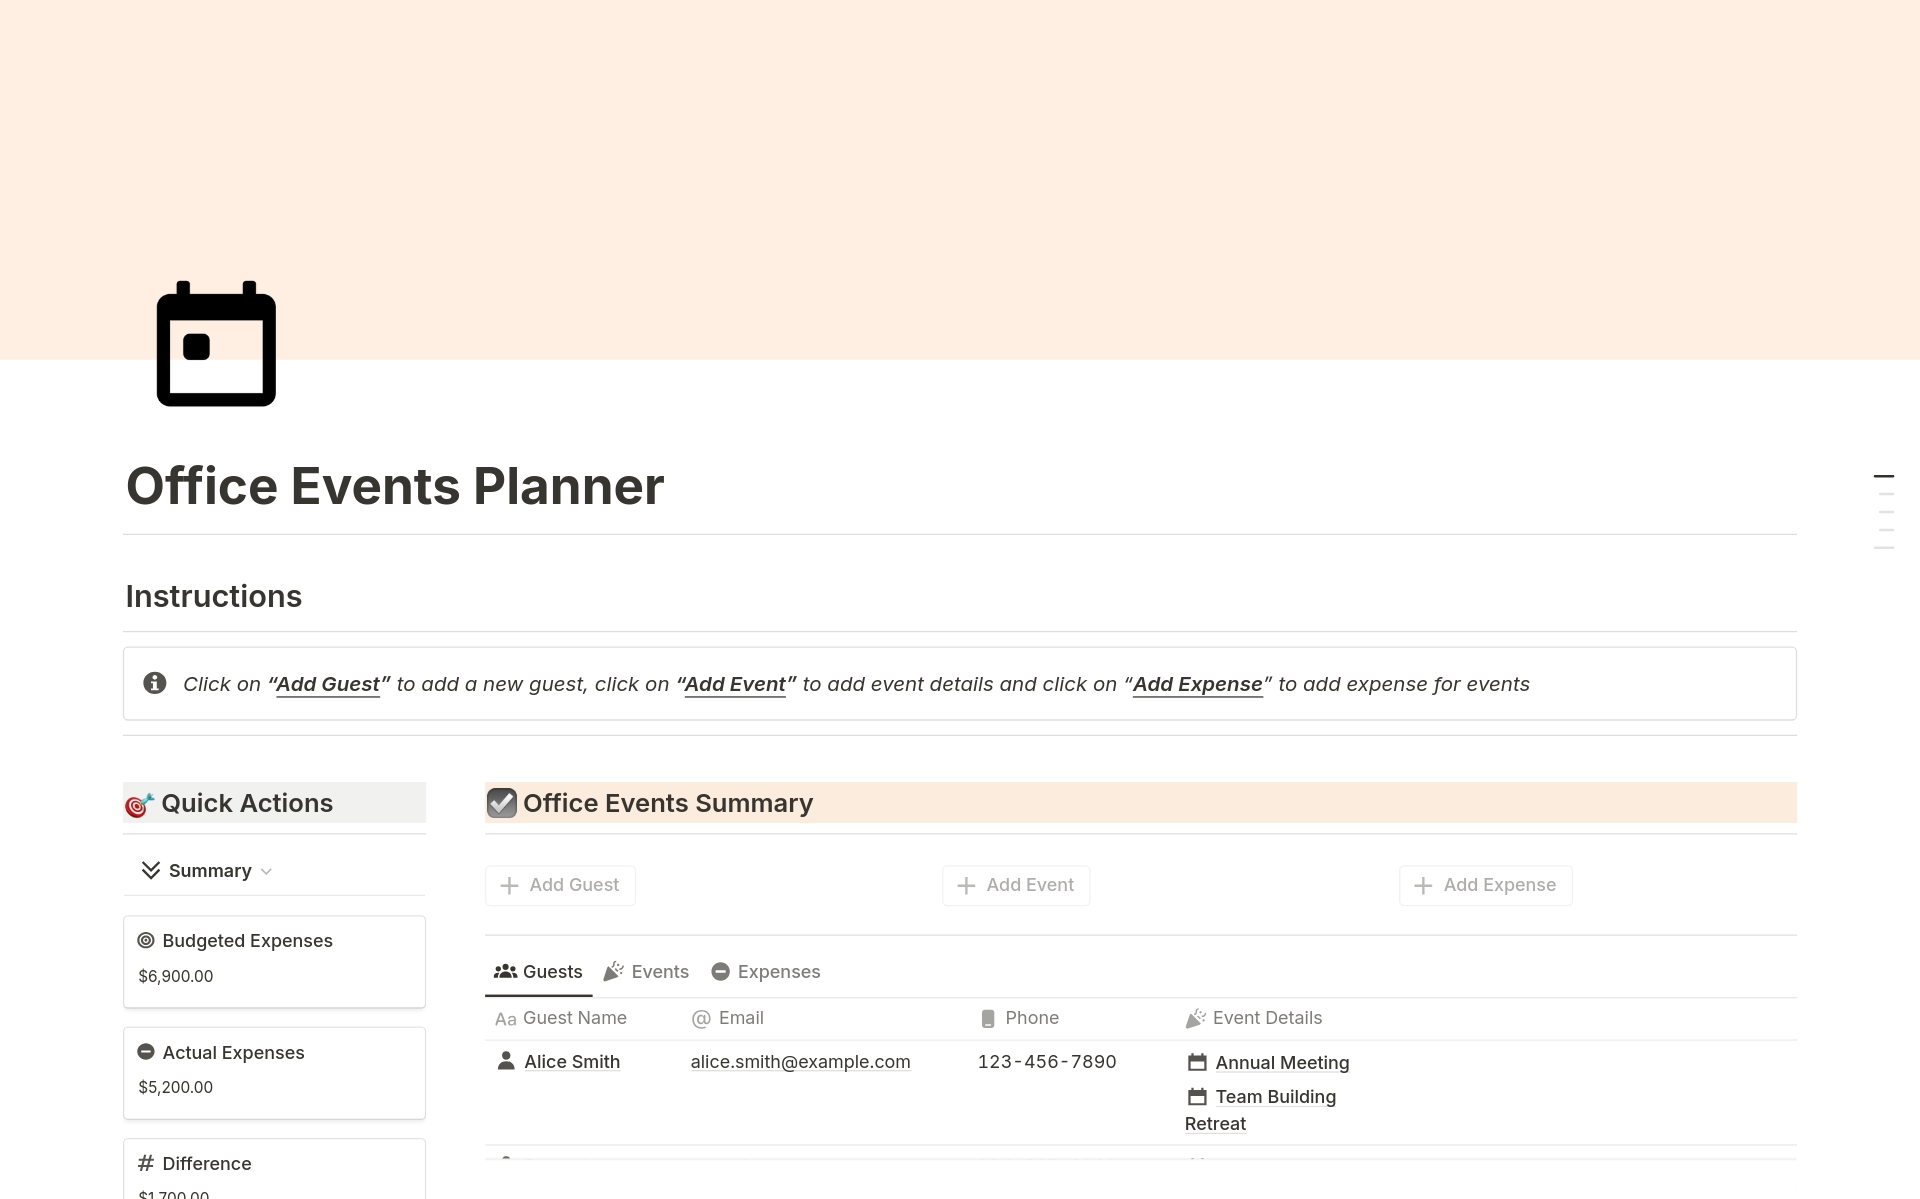 Ideal for those who are looking to manage their office events under one glance. This tracker helps you keep track of guest lists, all events scheduled, total expenses and much more.